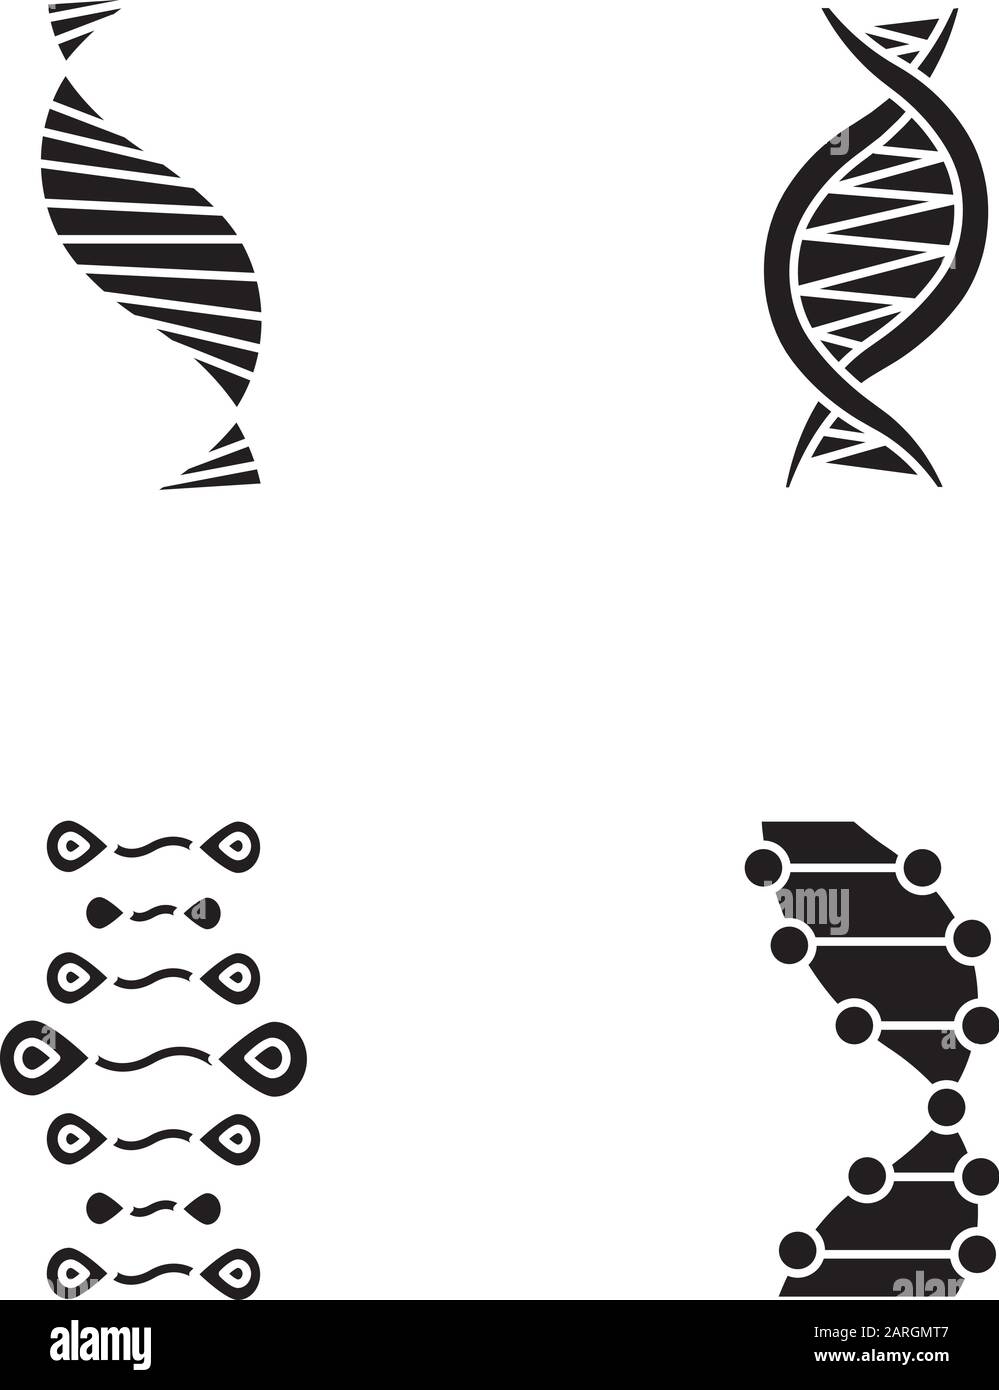 DNA strands glyph icons set. Deoxyribonucleic, nucleic acid helix. Spiraling strands. Chromosome. Molecular biology. Genetic code. Genome. Genetics. S Stock Vector